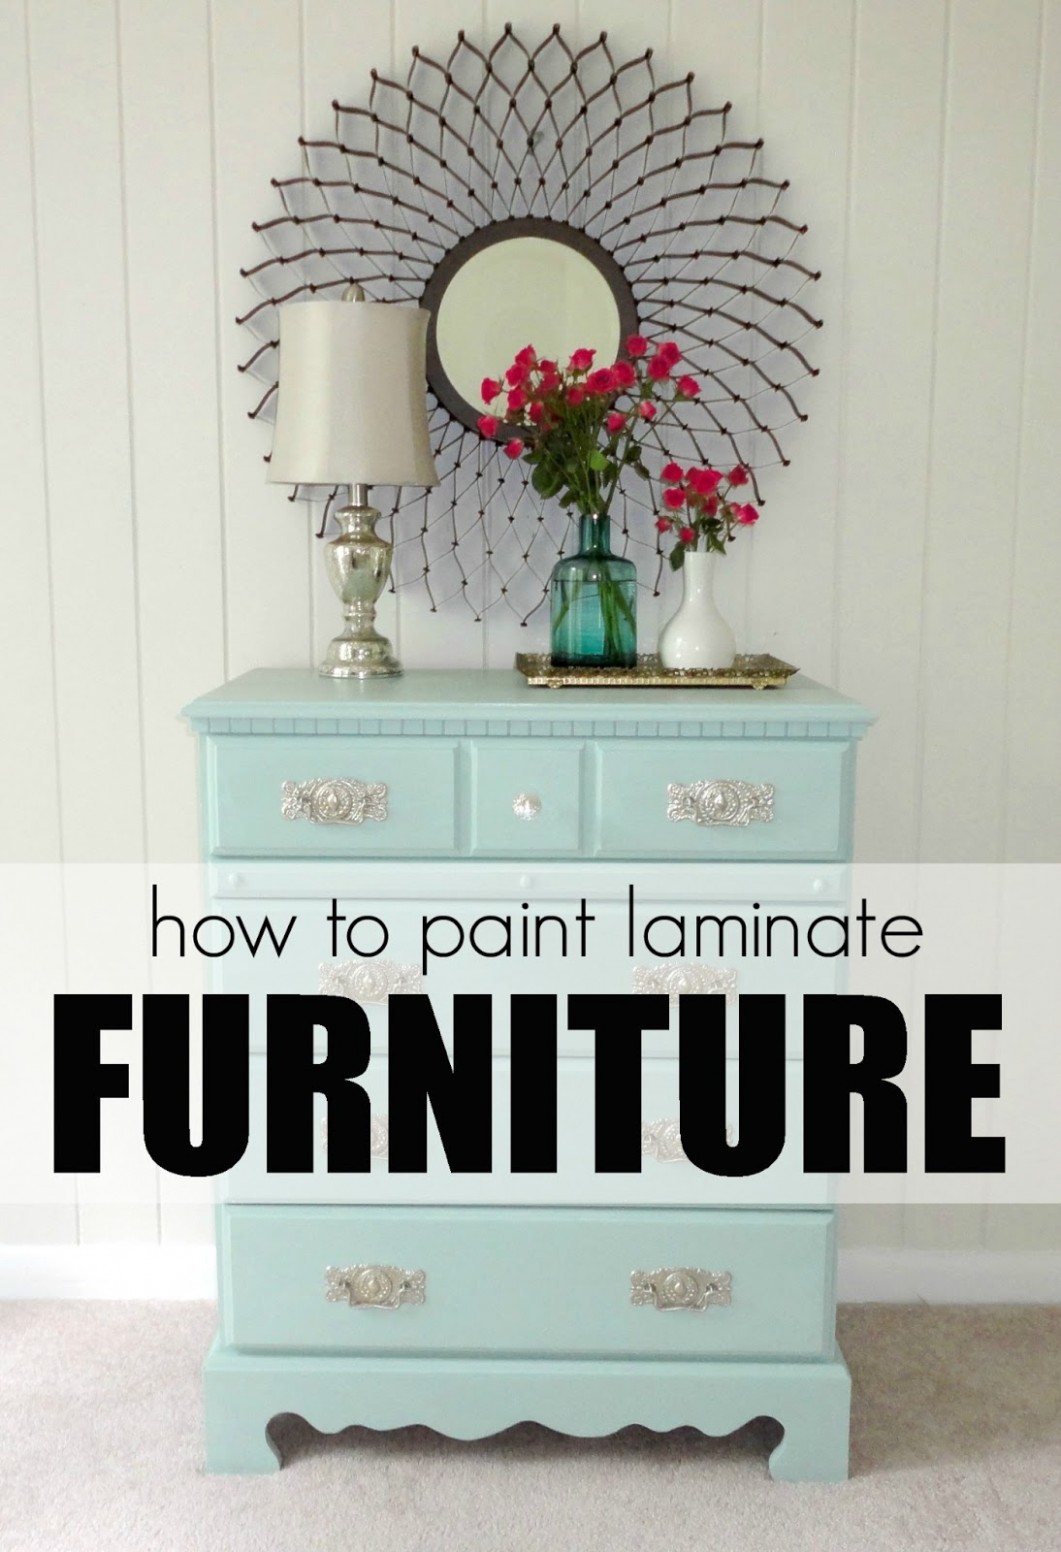 Livelovediy: How To Paint Laminate Furniture In 7 Easy Steps! Can You Paint Chalk Paint Over Polyurethane